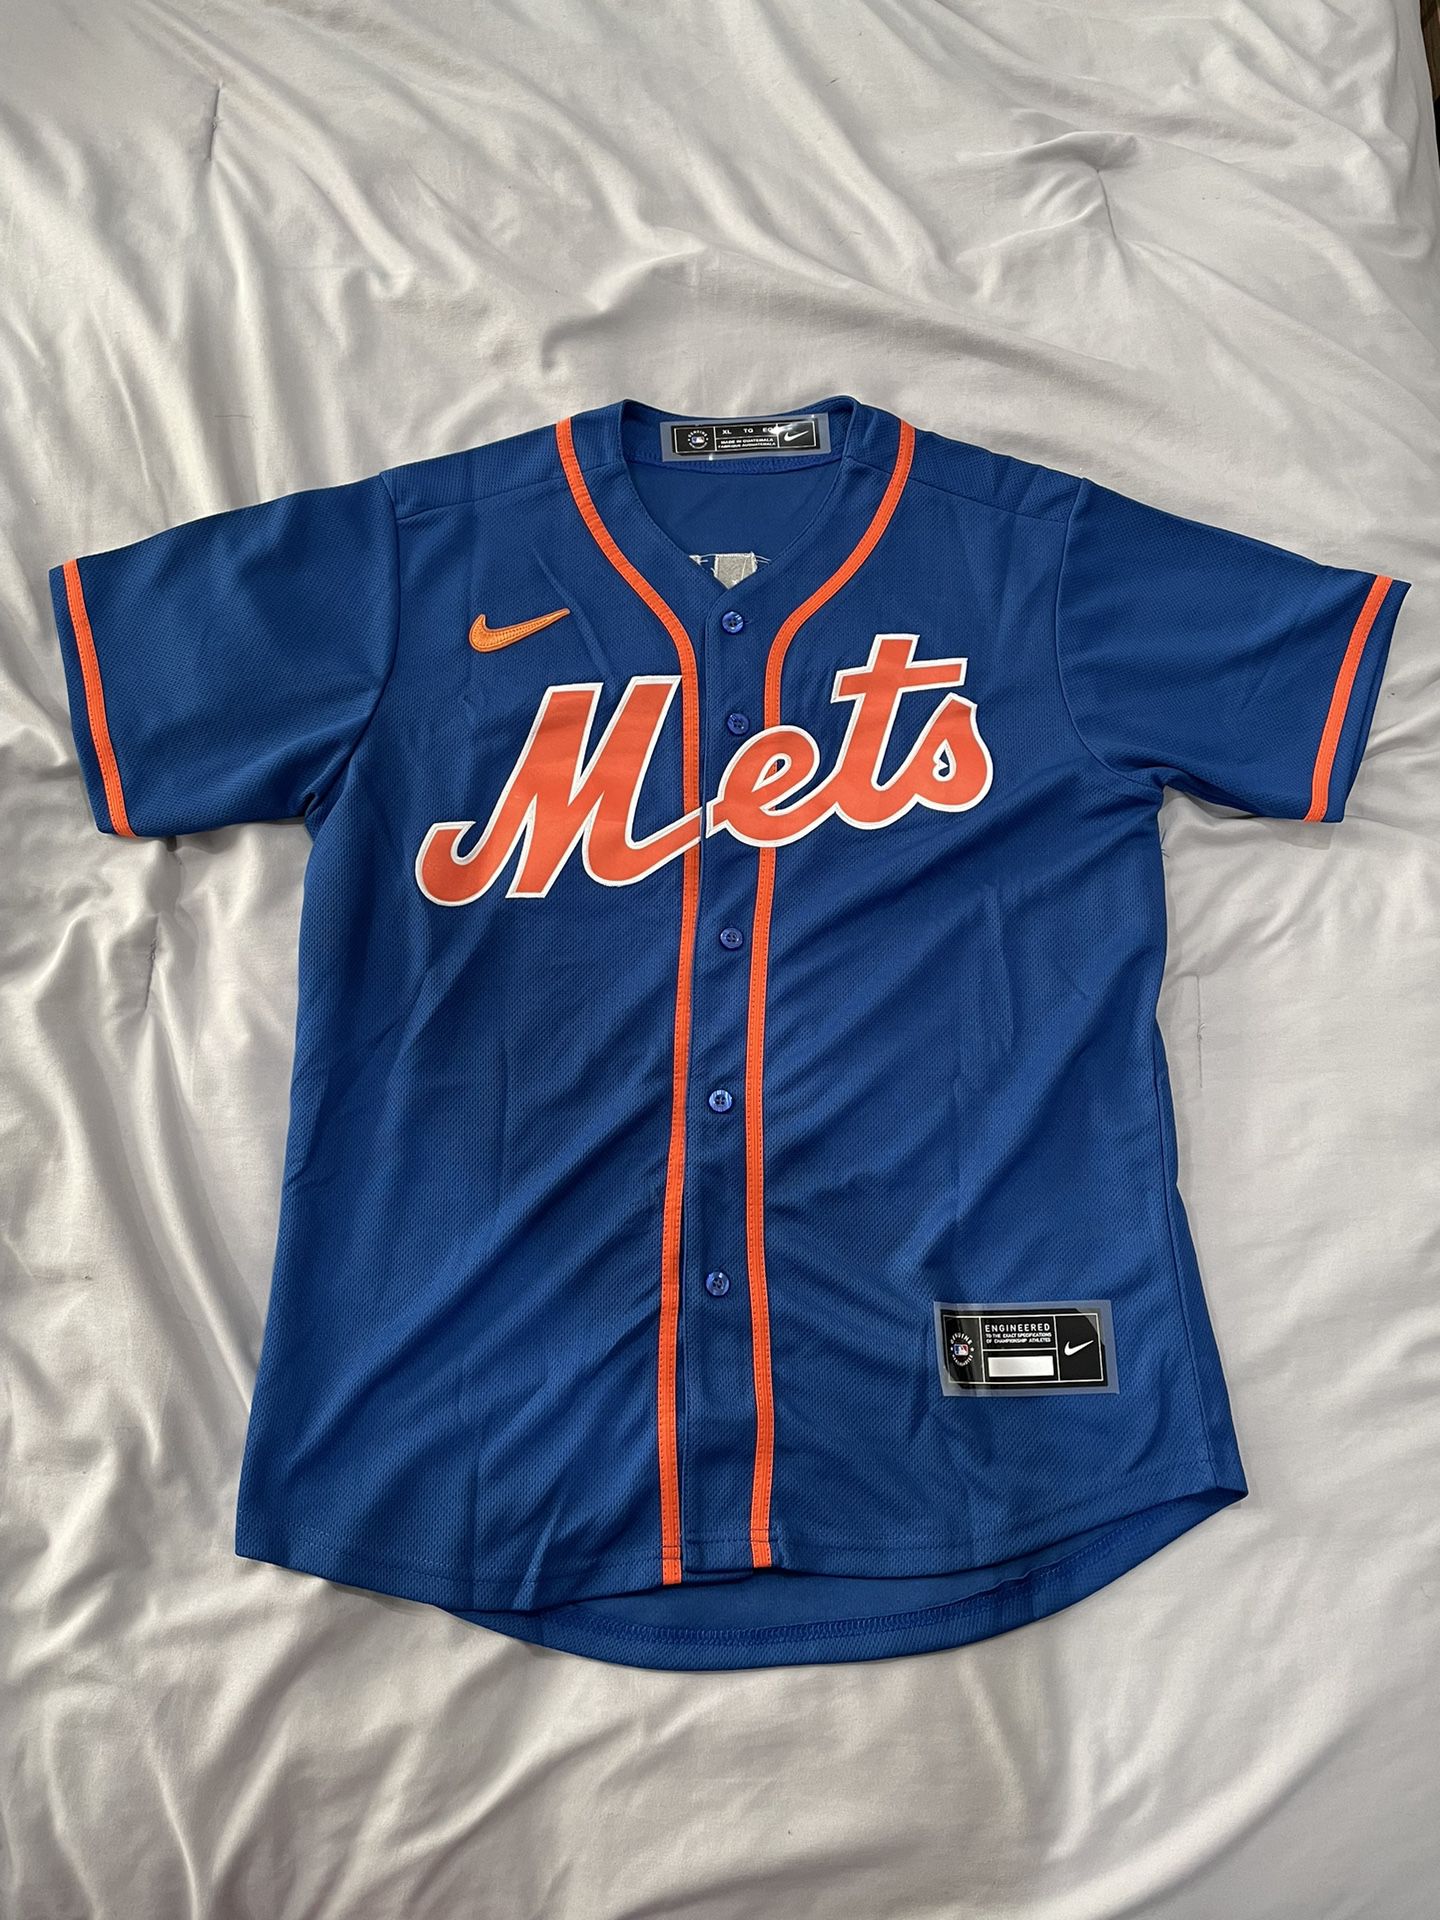 Mets Jersey for Sale in Holbrook, NY - OfferUp